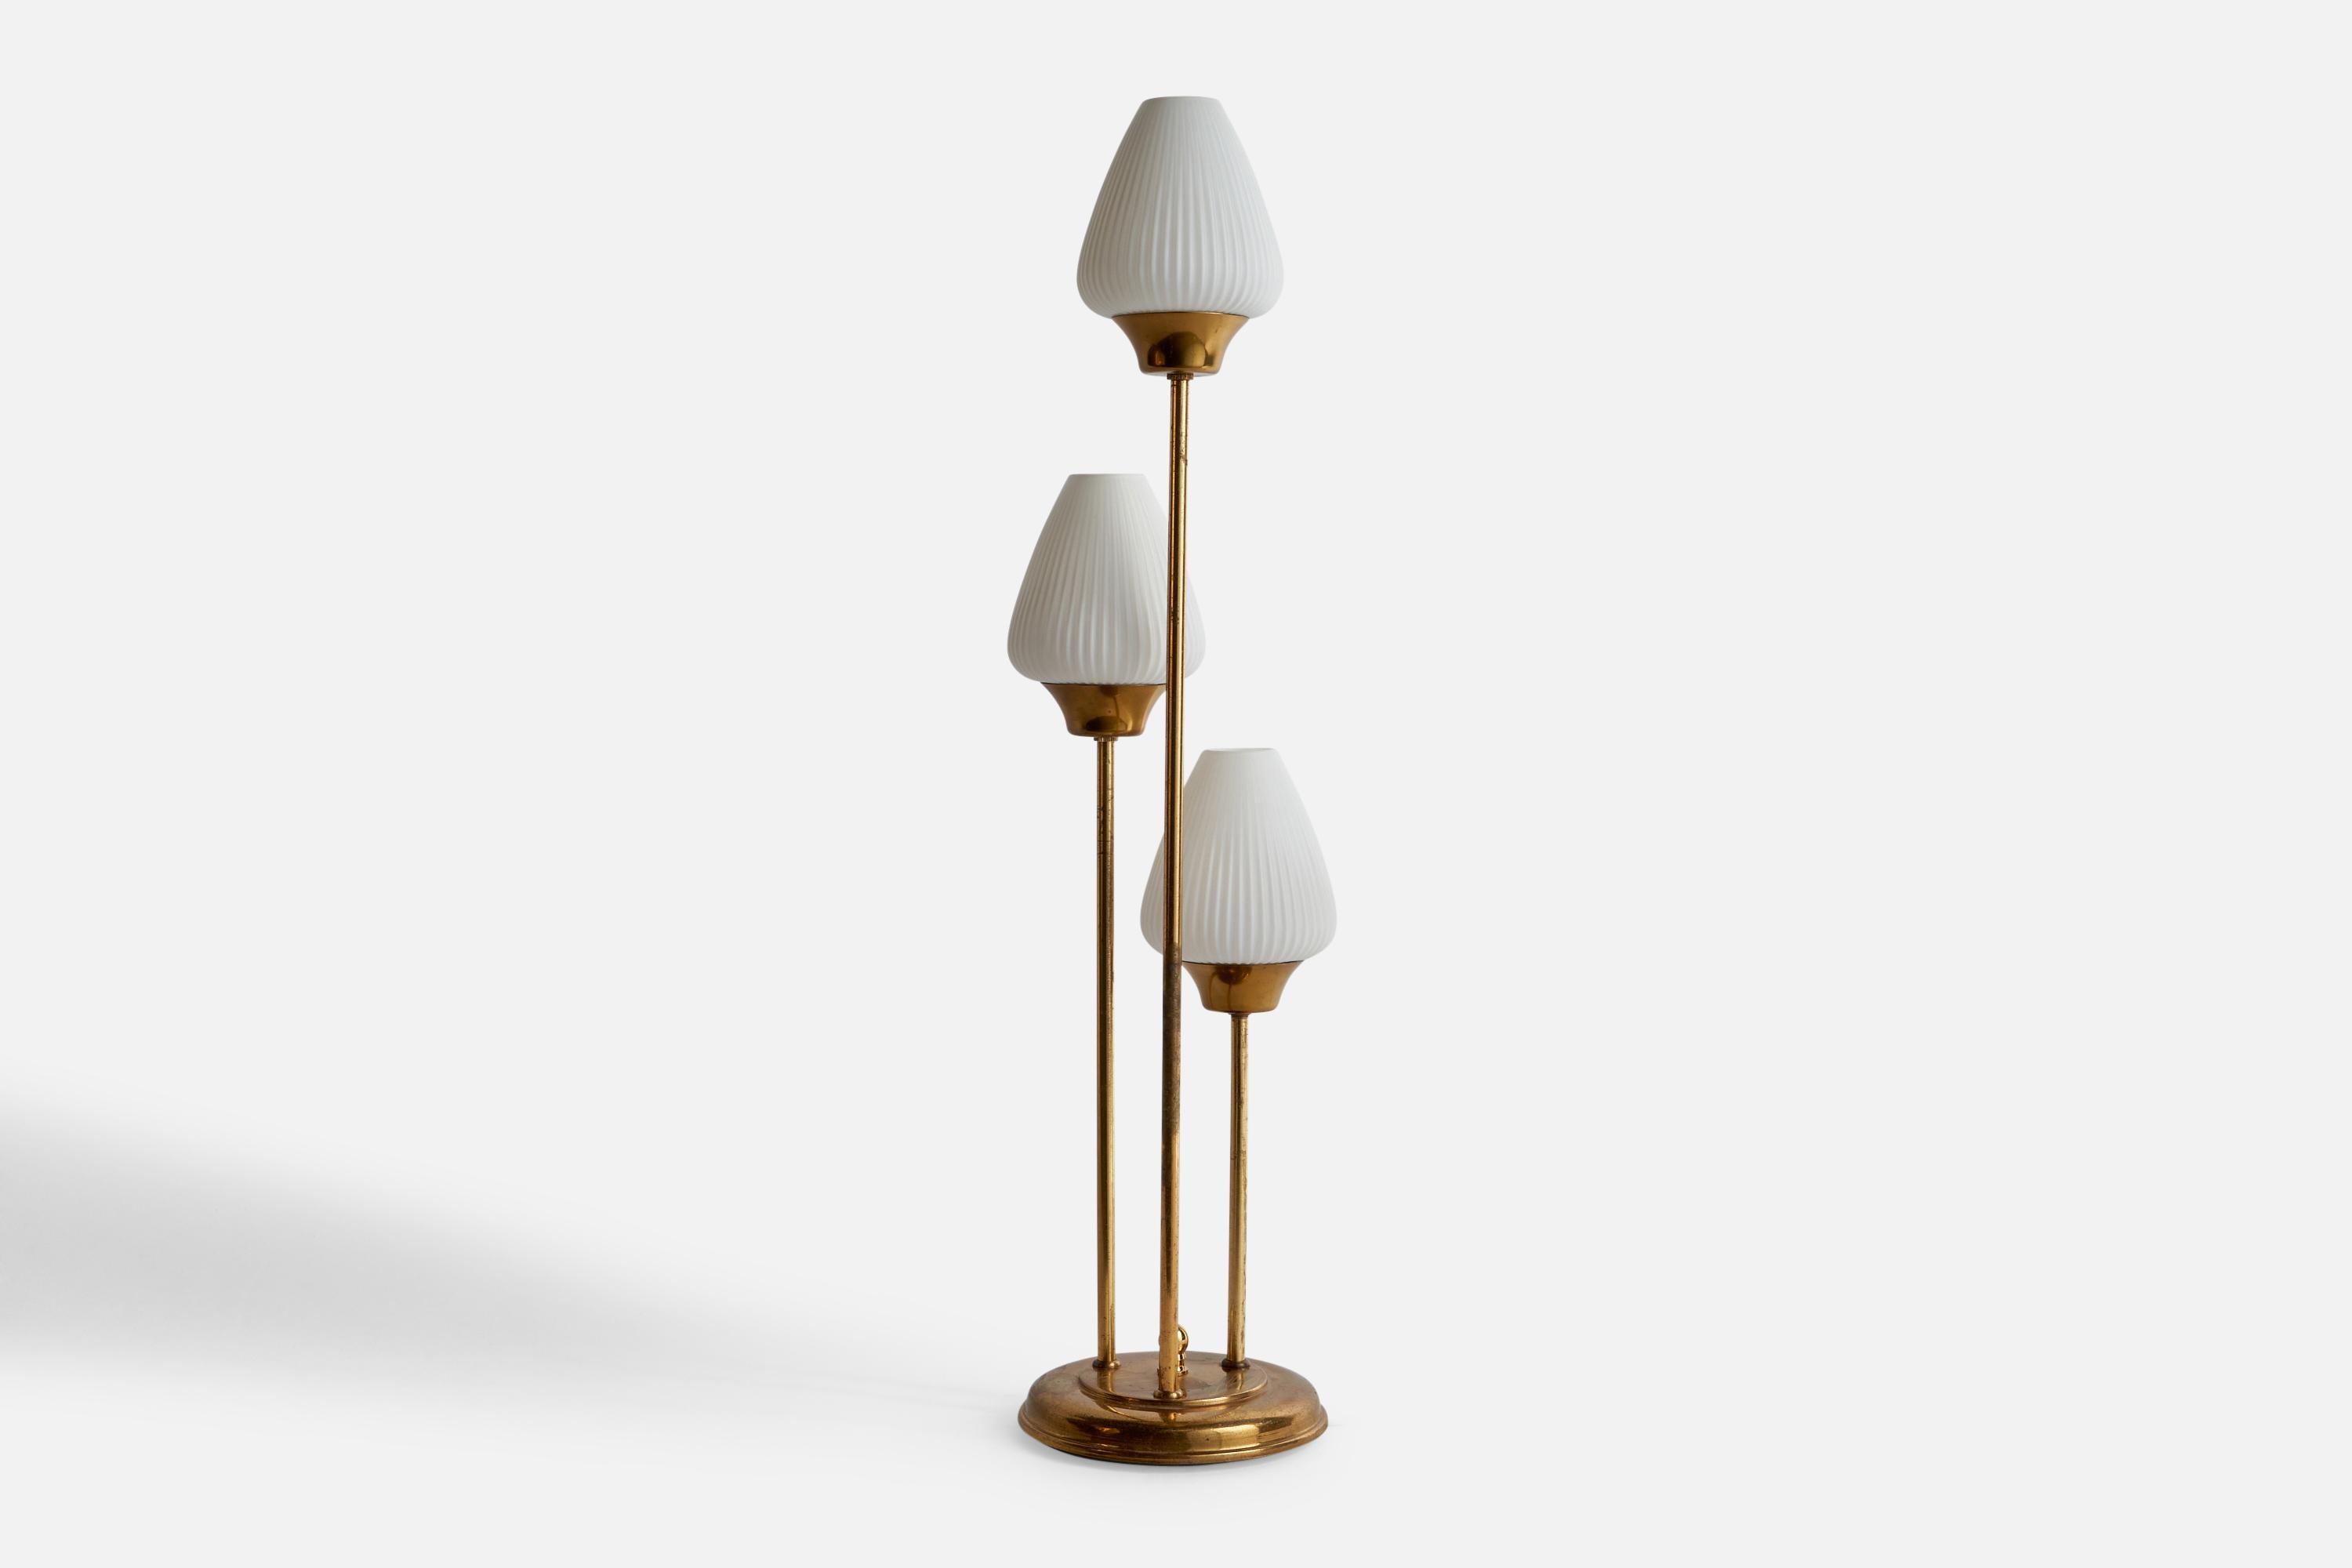 A three-armed brass and opaline glass table lamp designed and produced by Abo Randers, Denmark, 1970s.

Overall Dimensions (inches): 26.38” H x 6.4” W x 6.4” D
Bulb Specifications: E-26 Bulb
Number of Sockets: 3
All lighting will be converted for US